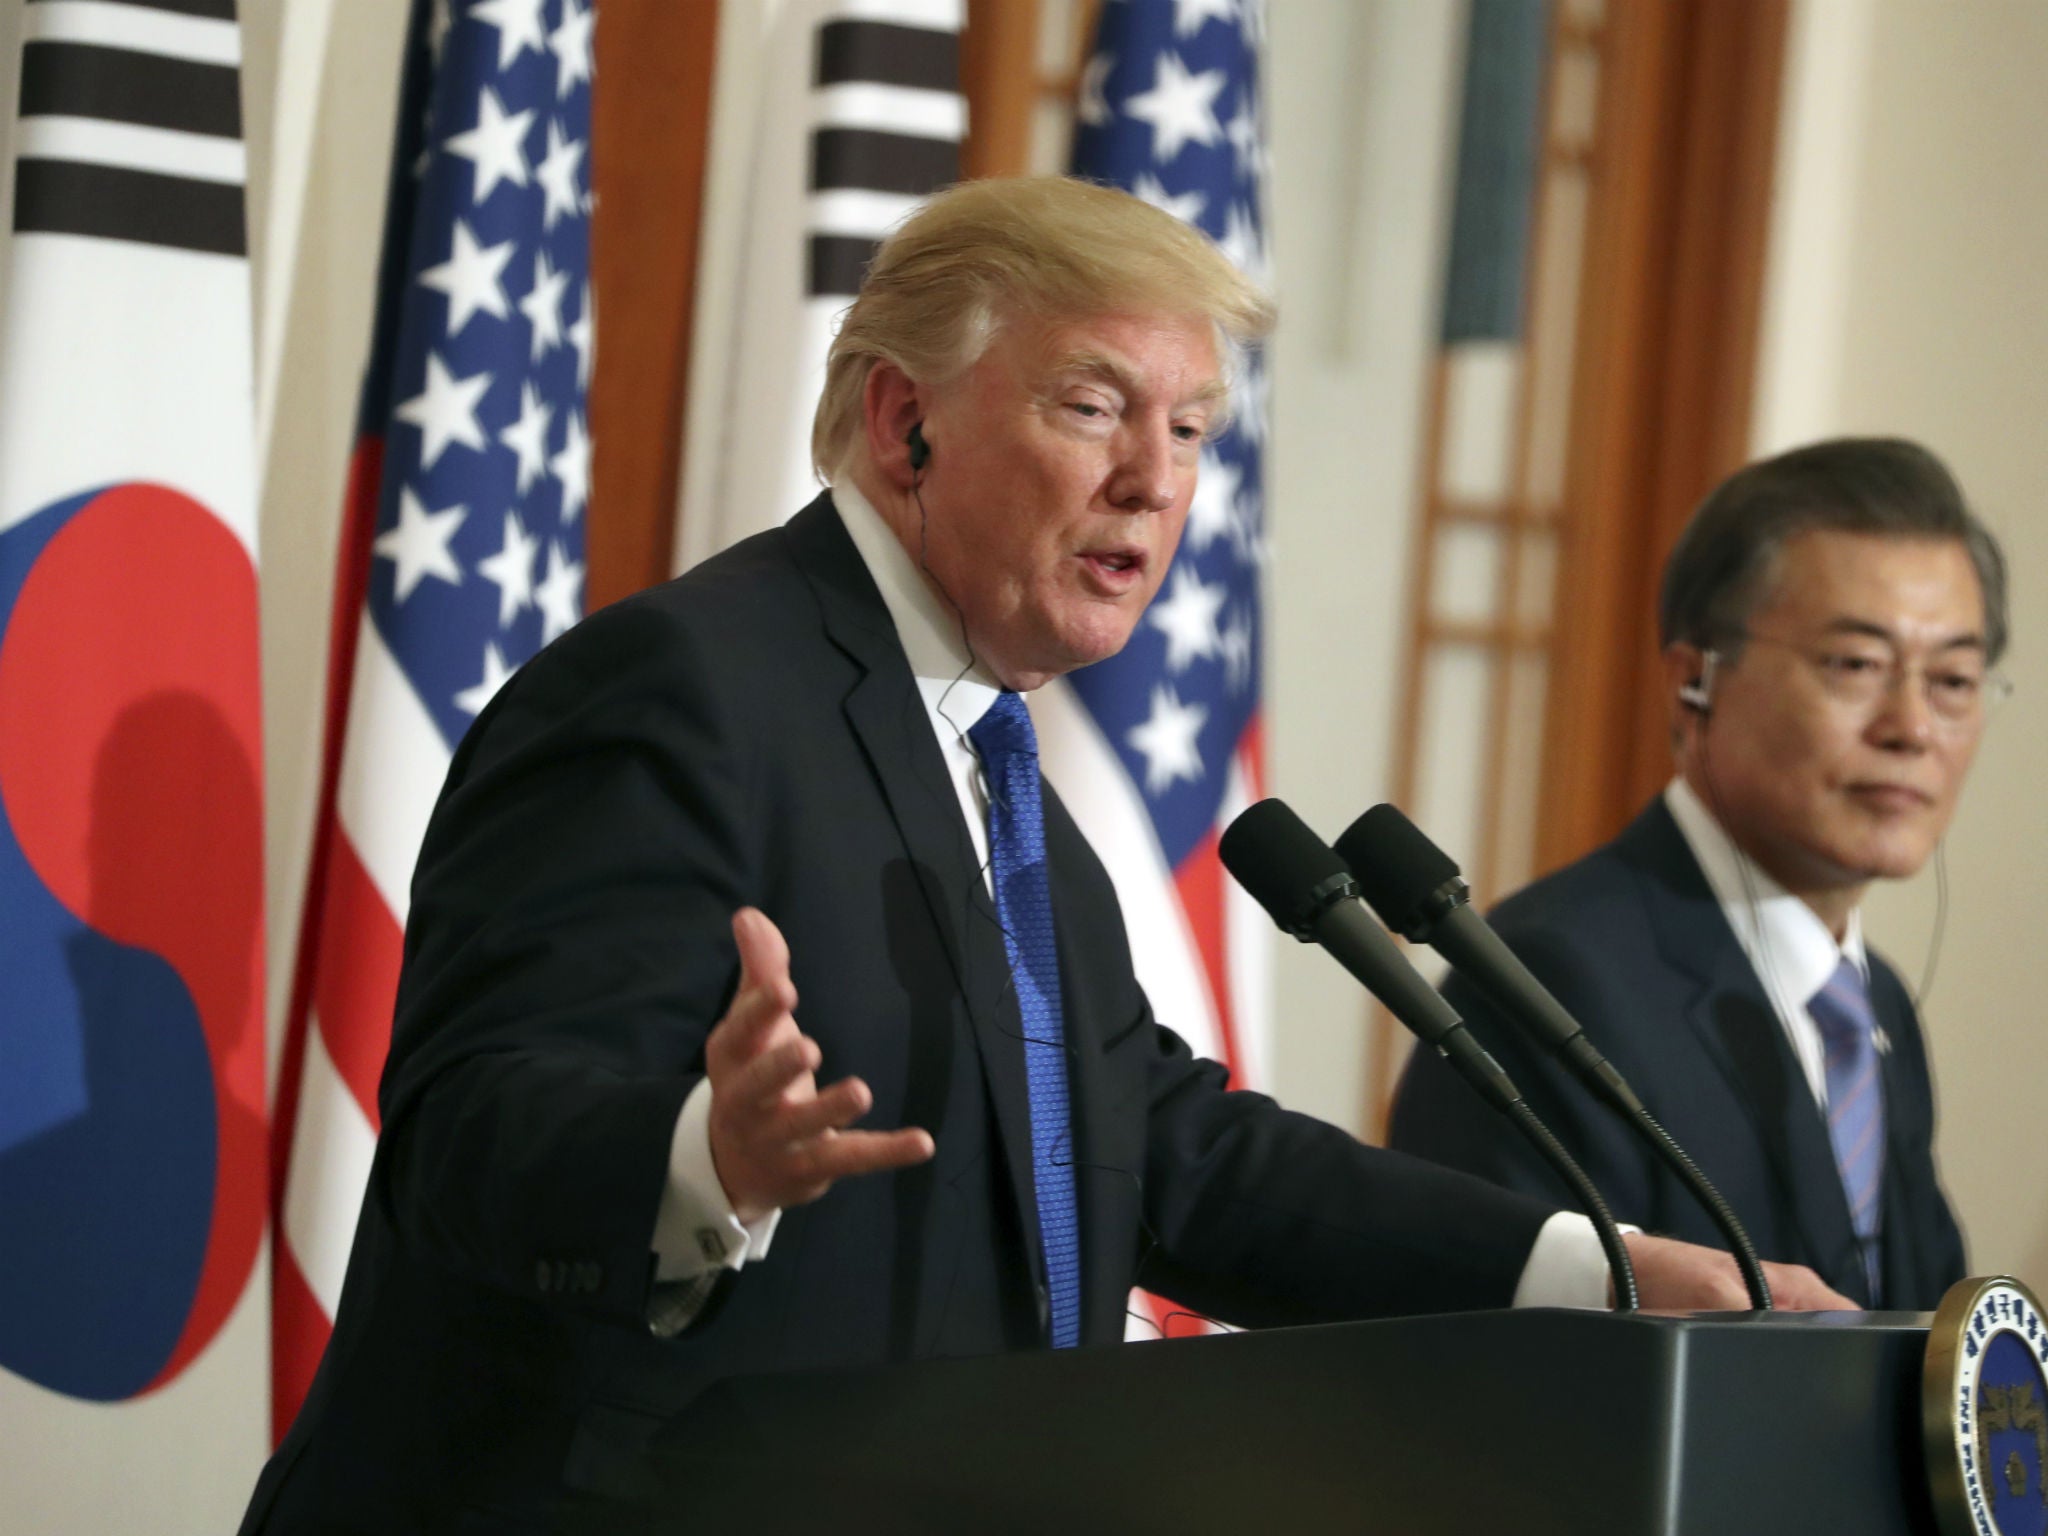 Donald Trump and South Korean President Moon Jae-In shake hands during a joint press conference at the presidential Blue House in Seoul, South Korea on Nov. 7, 2017